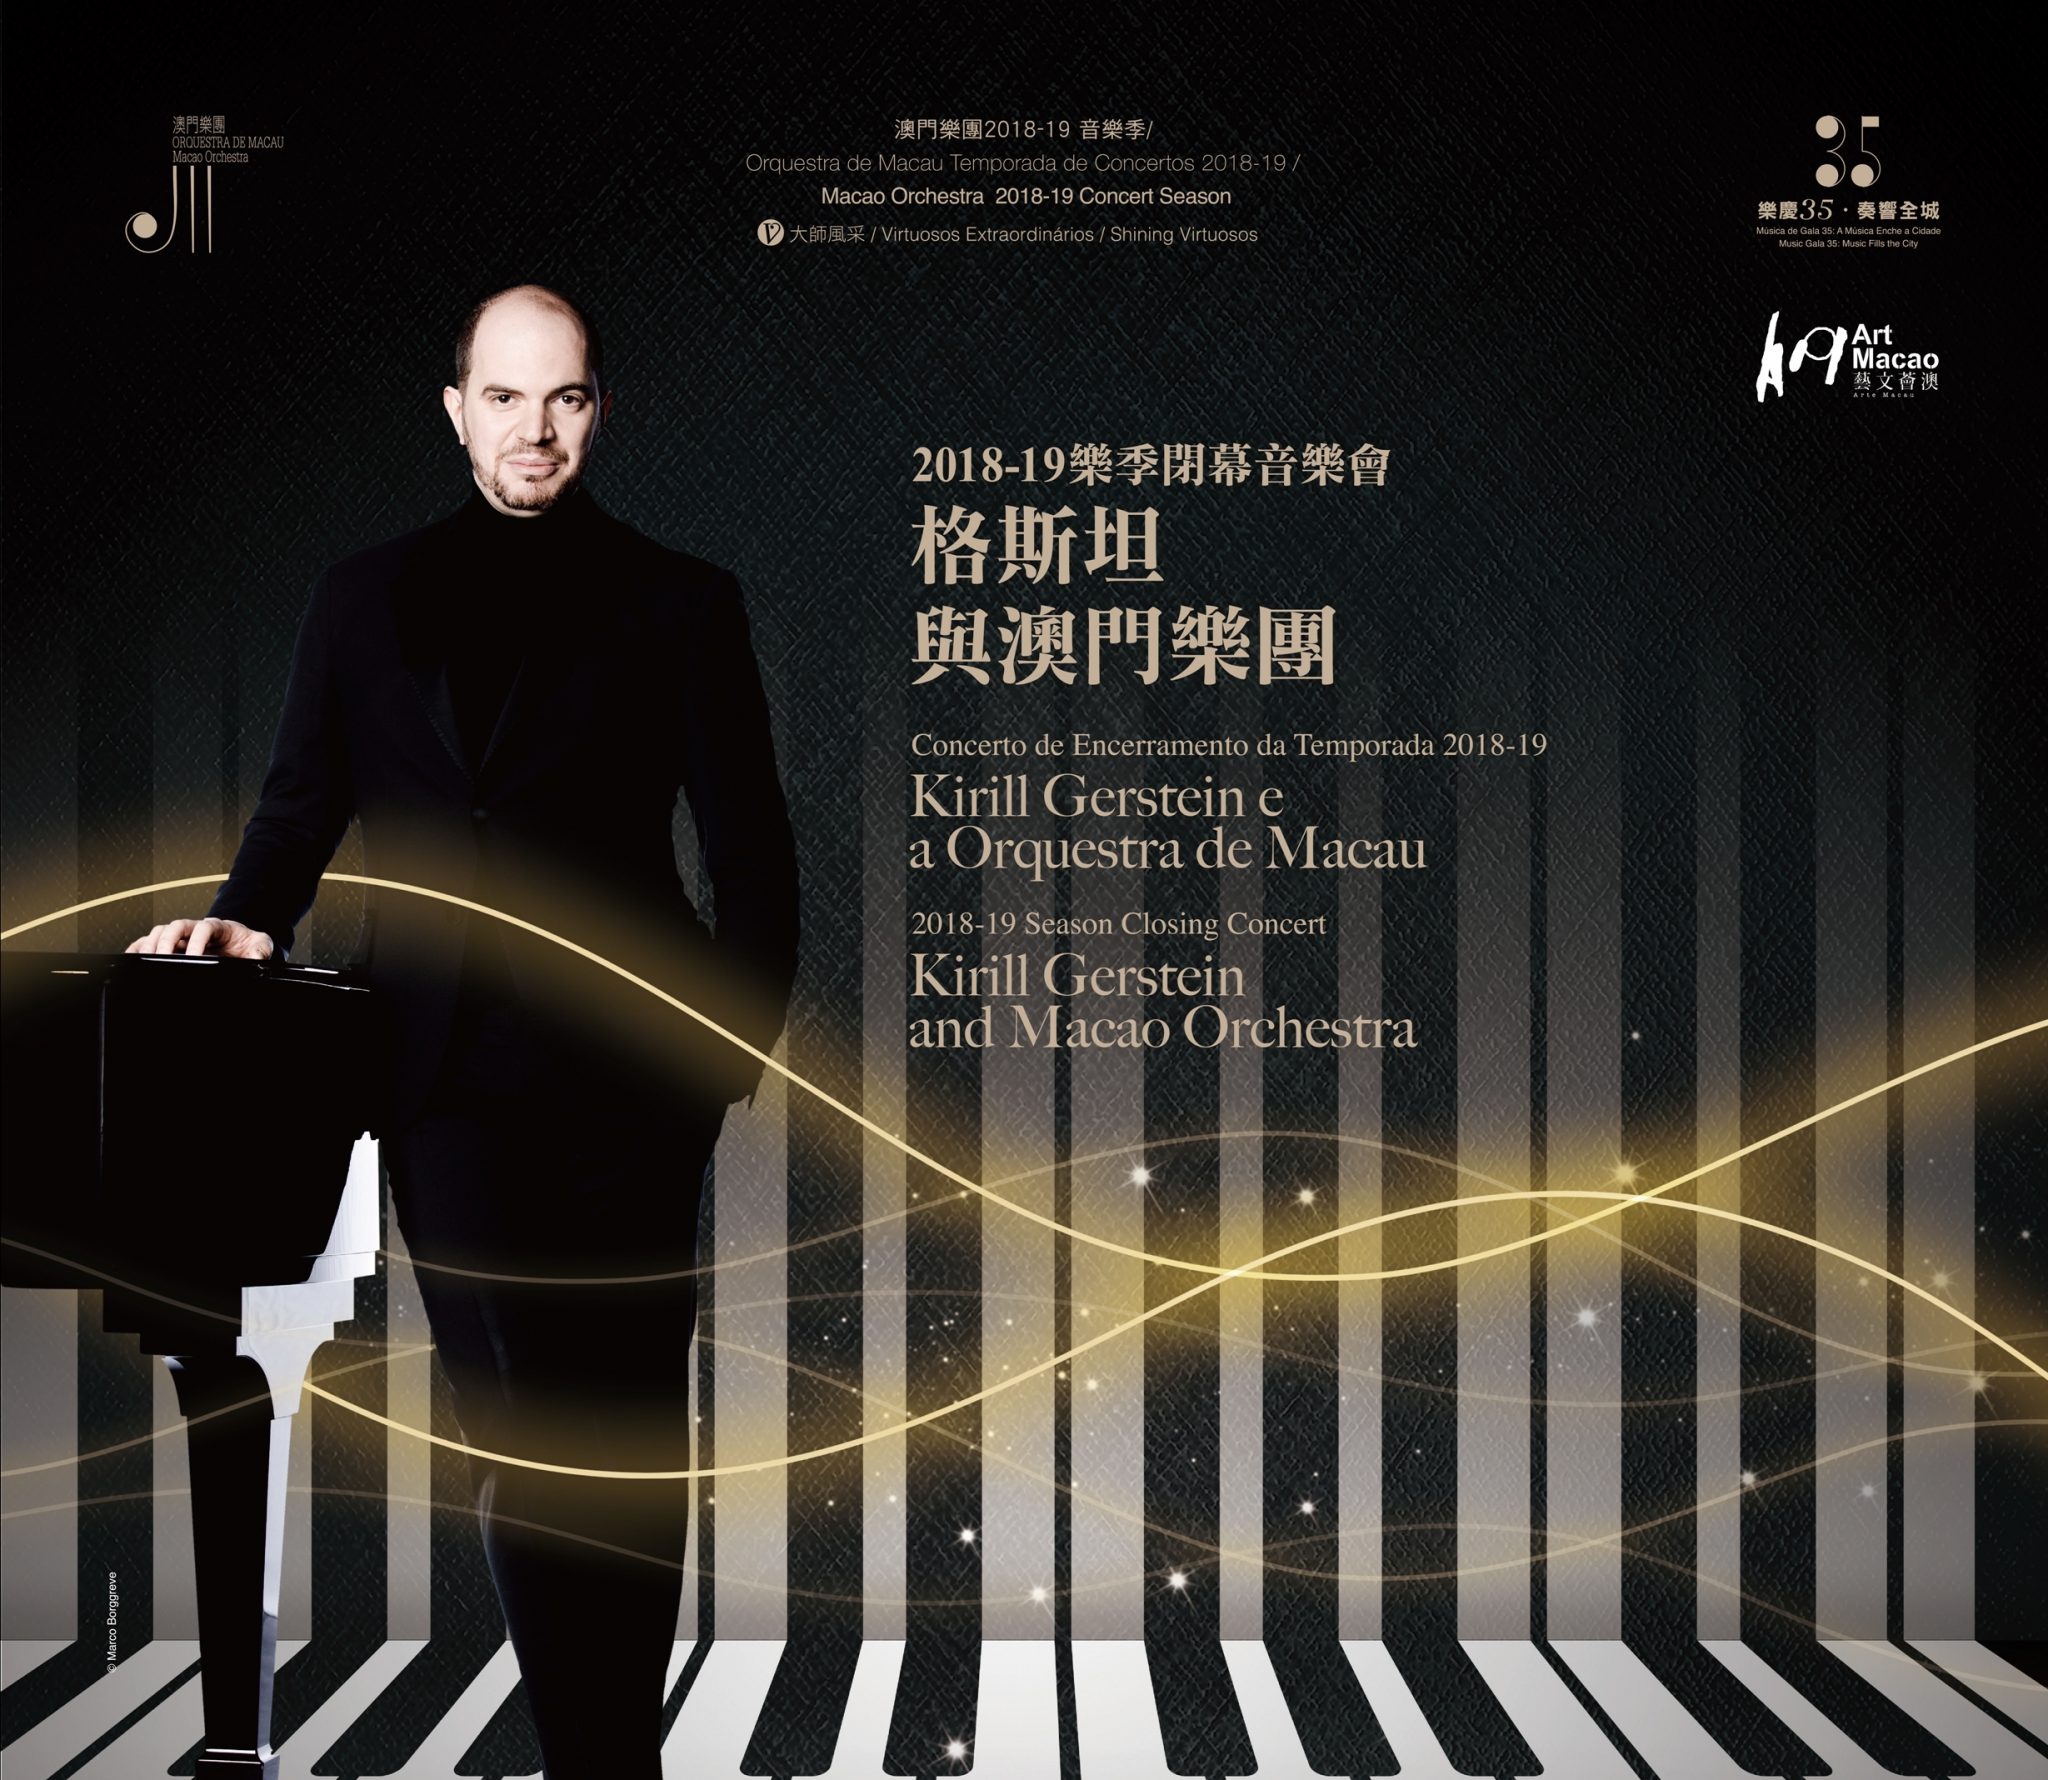 Kirill Gerstein and The Macao Orchestra: Macao Orchestra Season Closing Concert